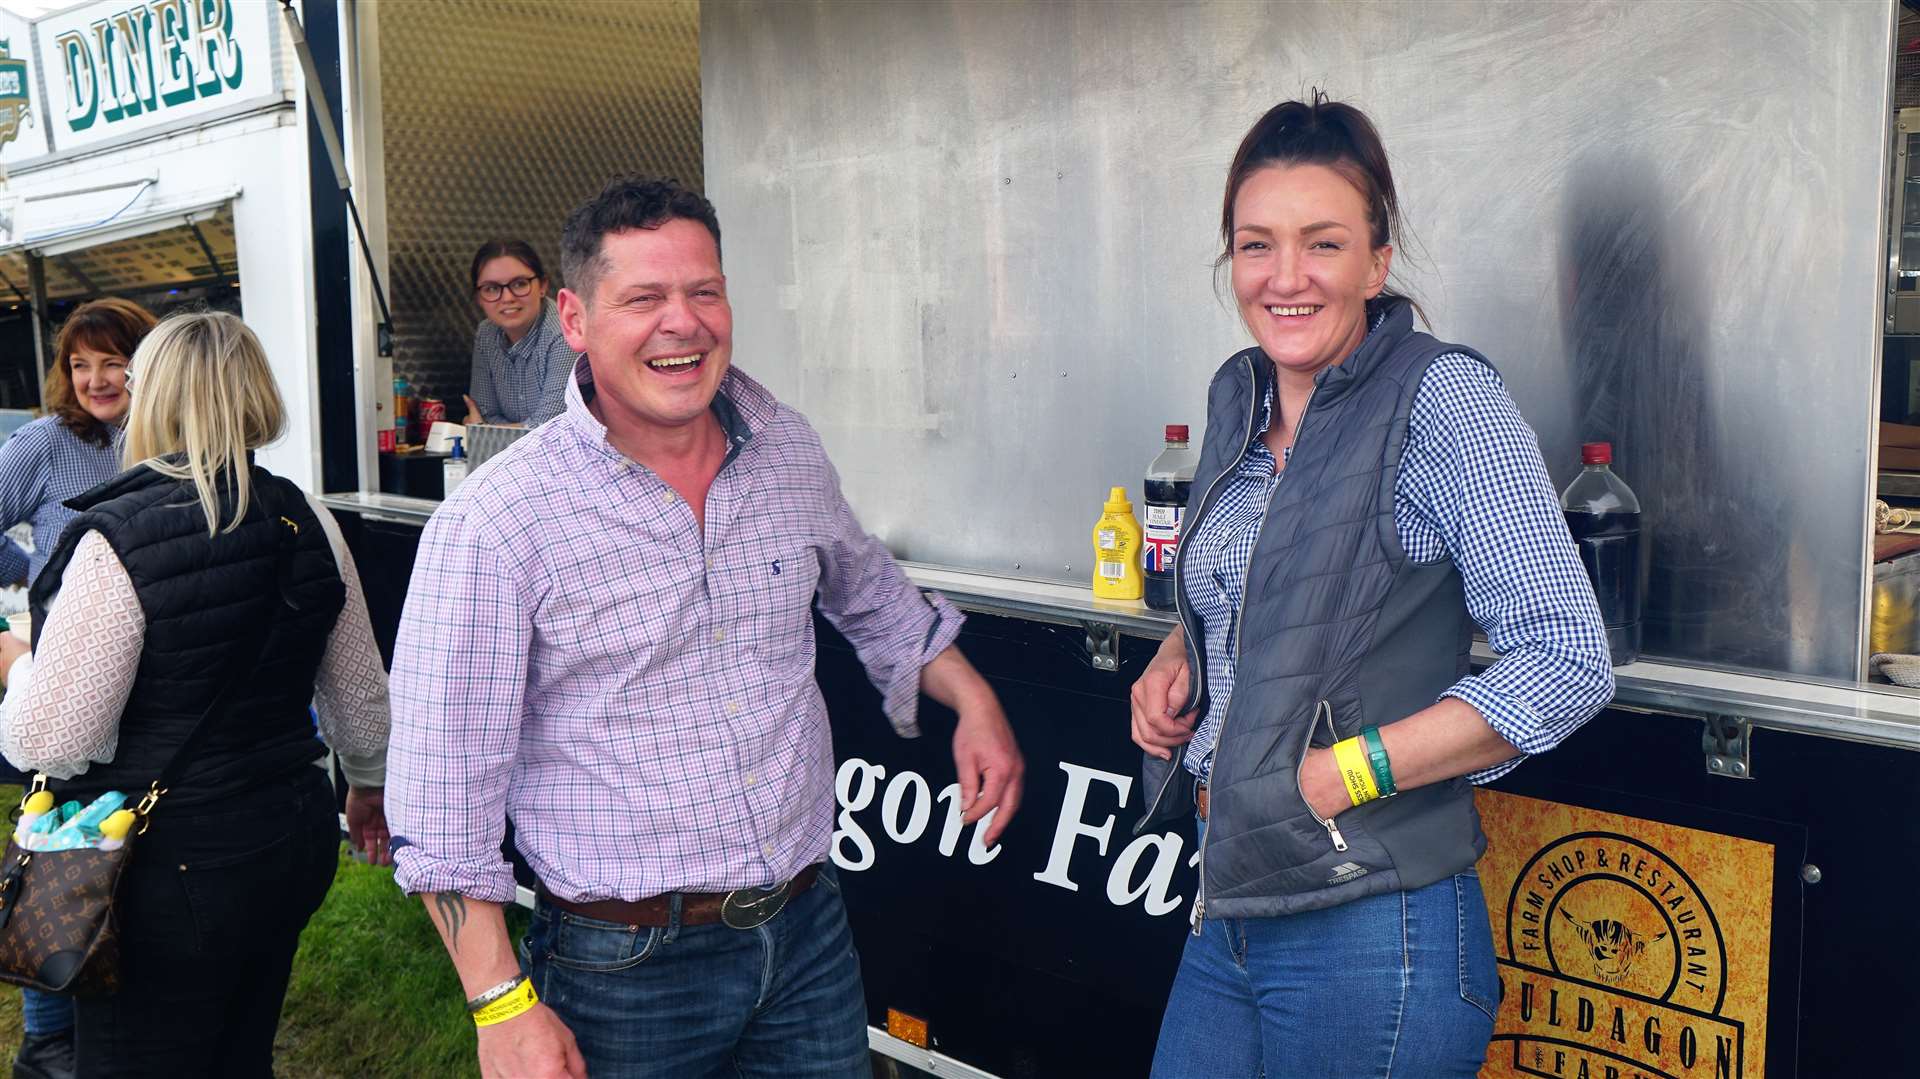 Greg Hooker and Terri Watt had a busy day serving food and drinks from their Puldagon tent and van. Picture: DGS